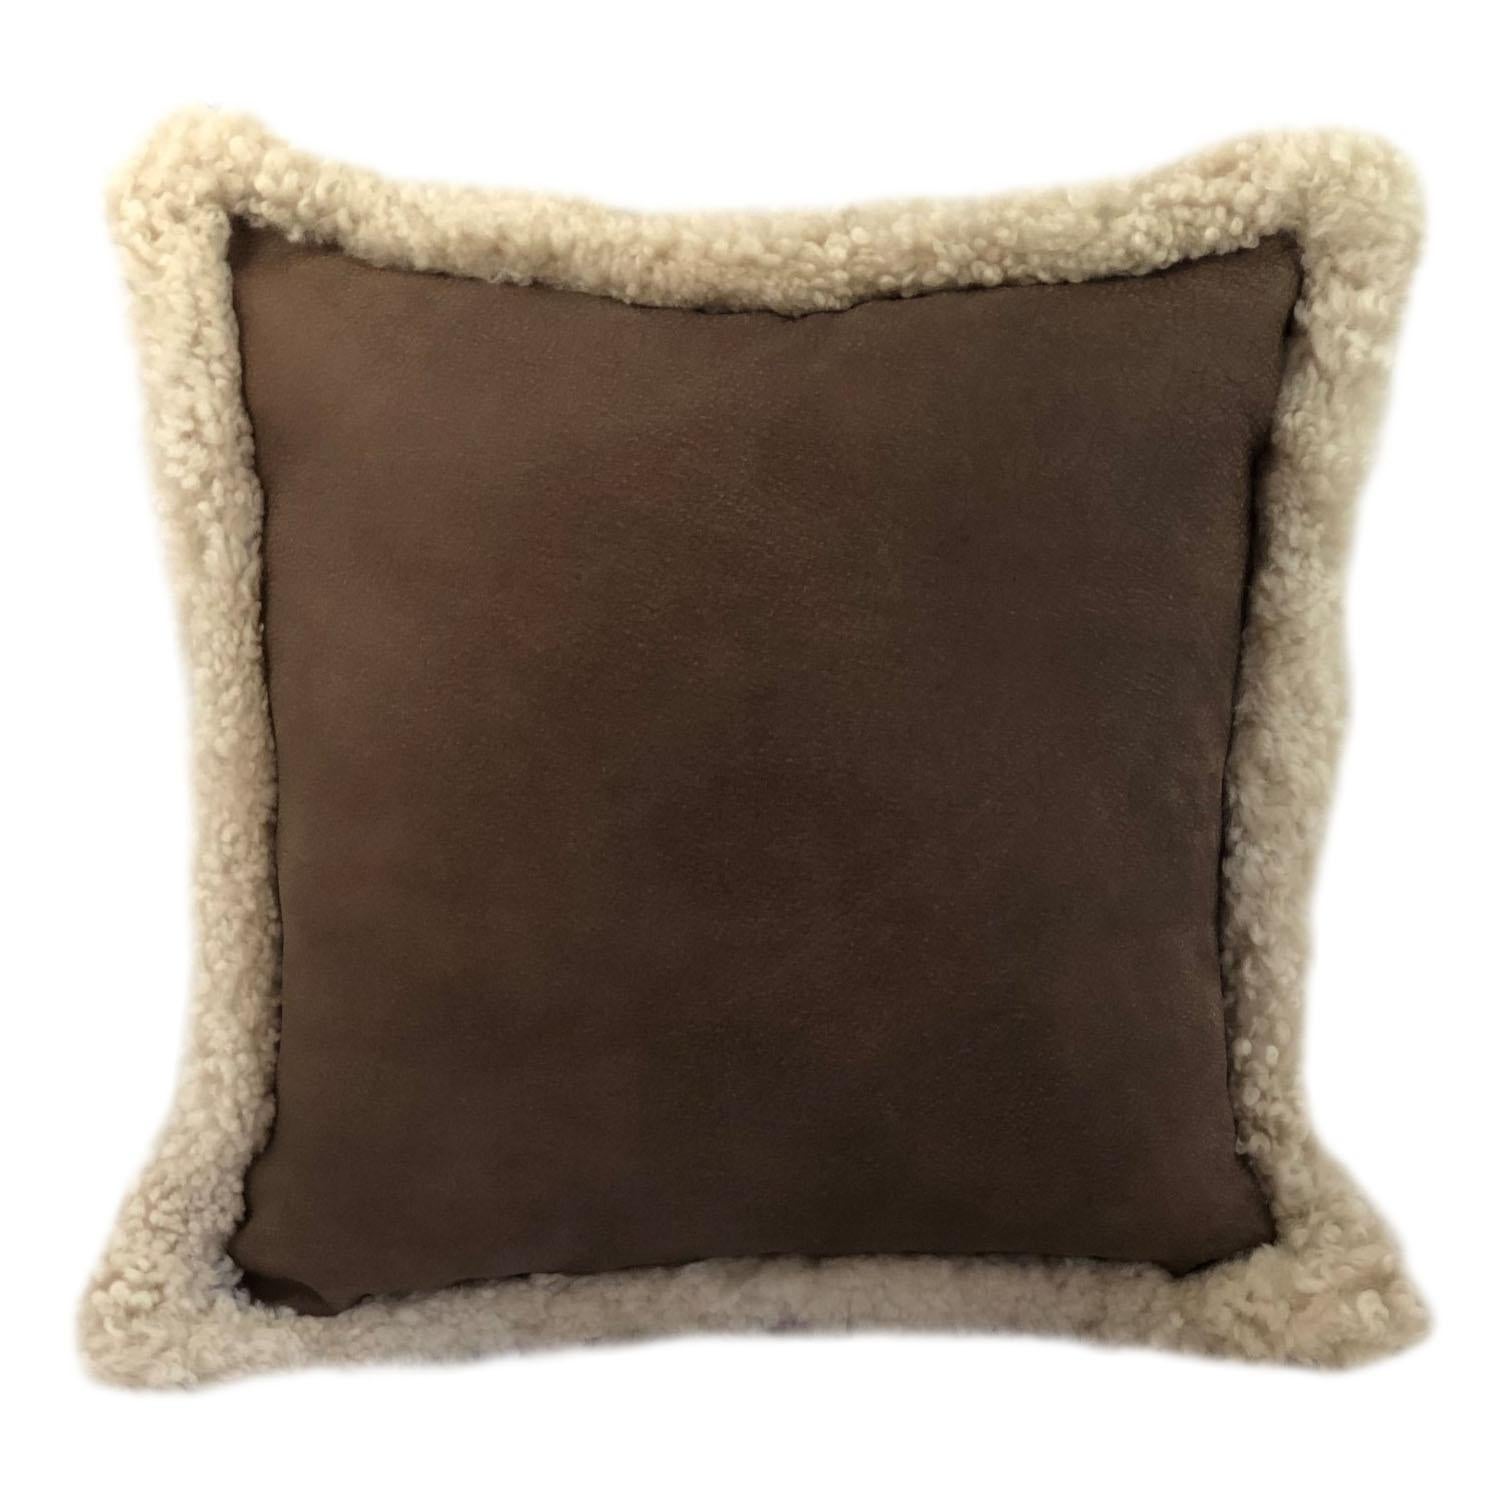 Outback Brown Leather and Shearling Sheepskin Pillow